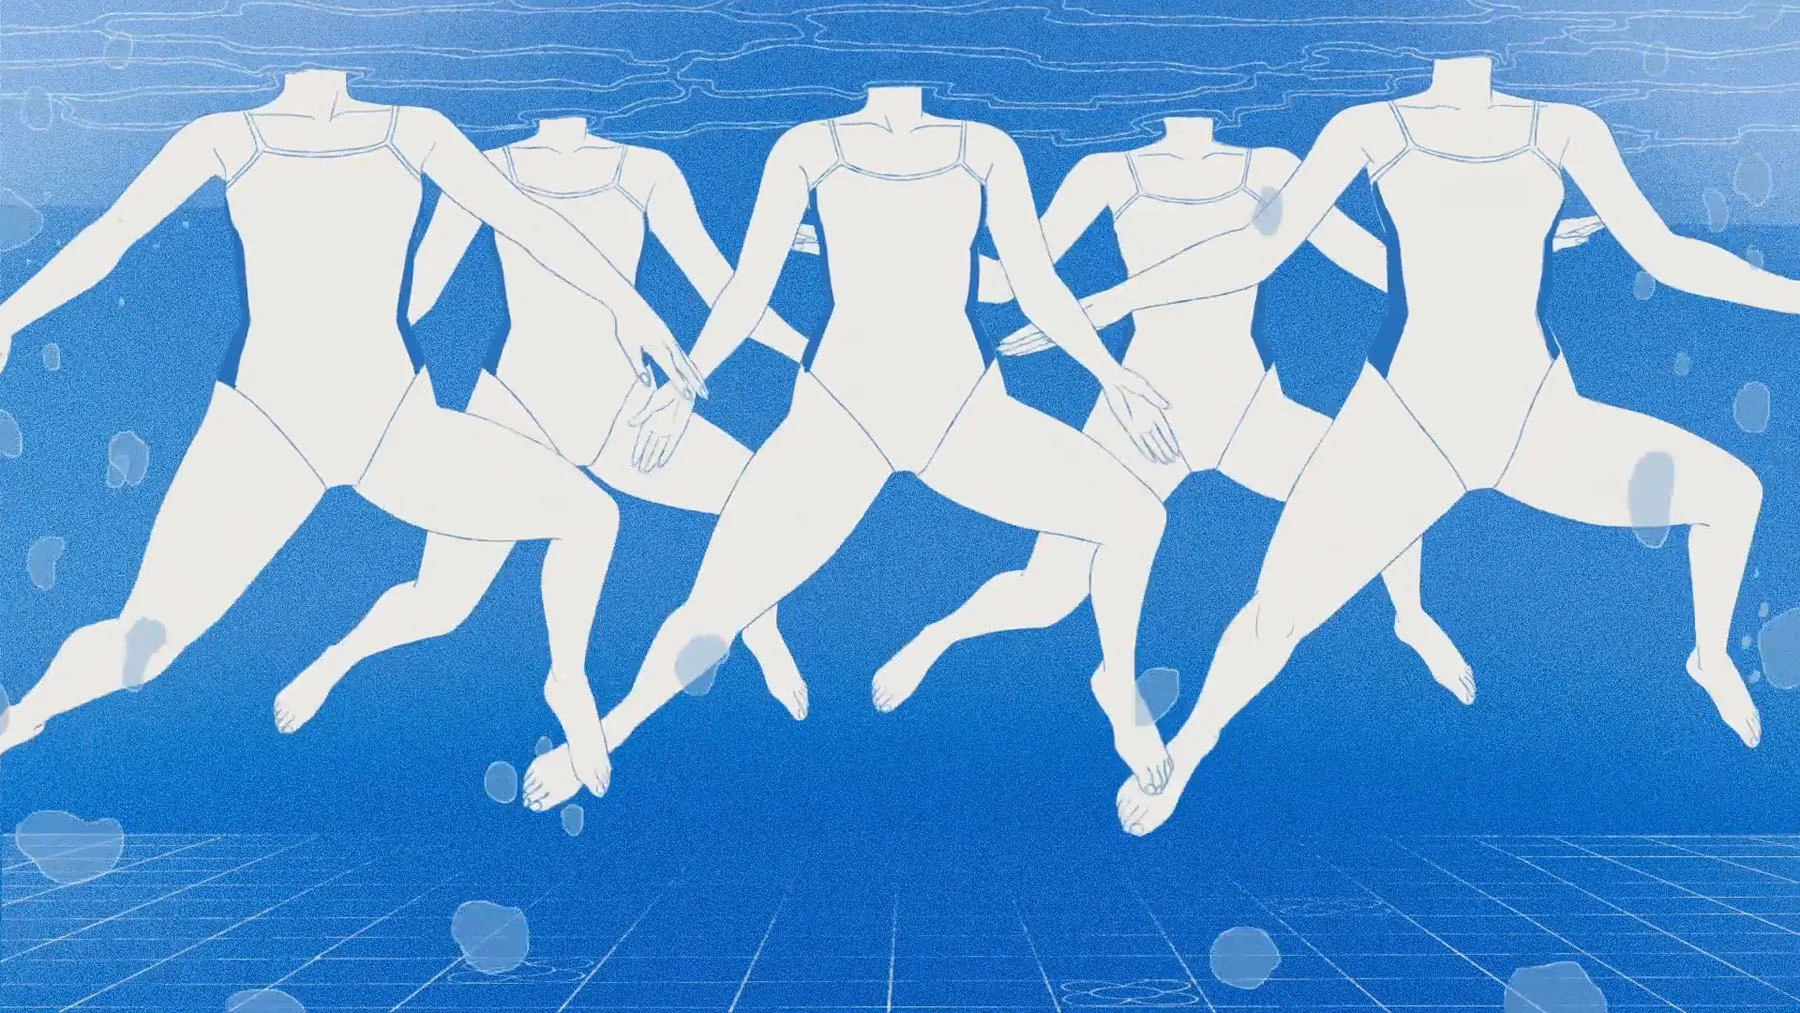 A clip from an animated film, showing a group of synchronized swimmers dancing underwater, and various angles of a girl swimming through a pool.